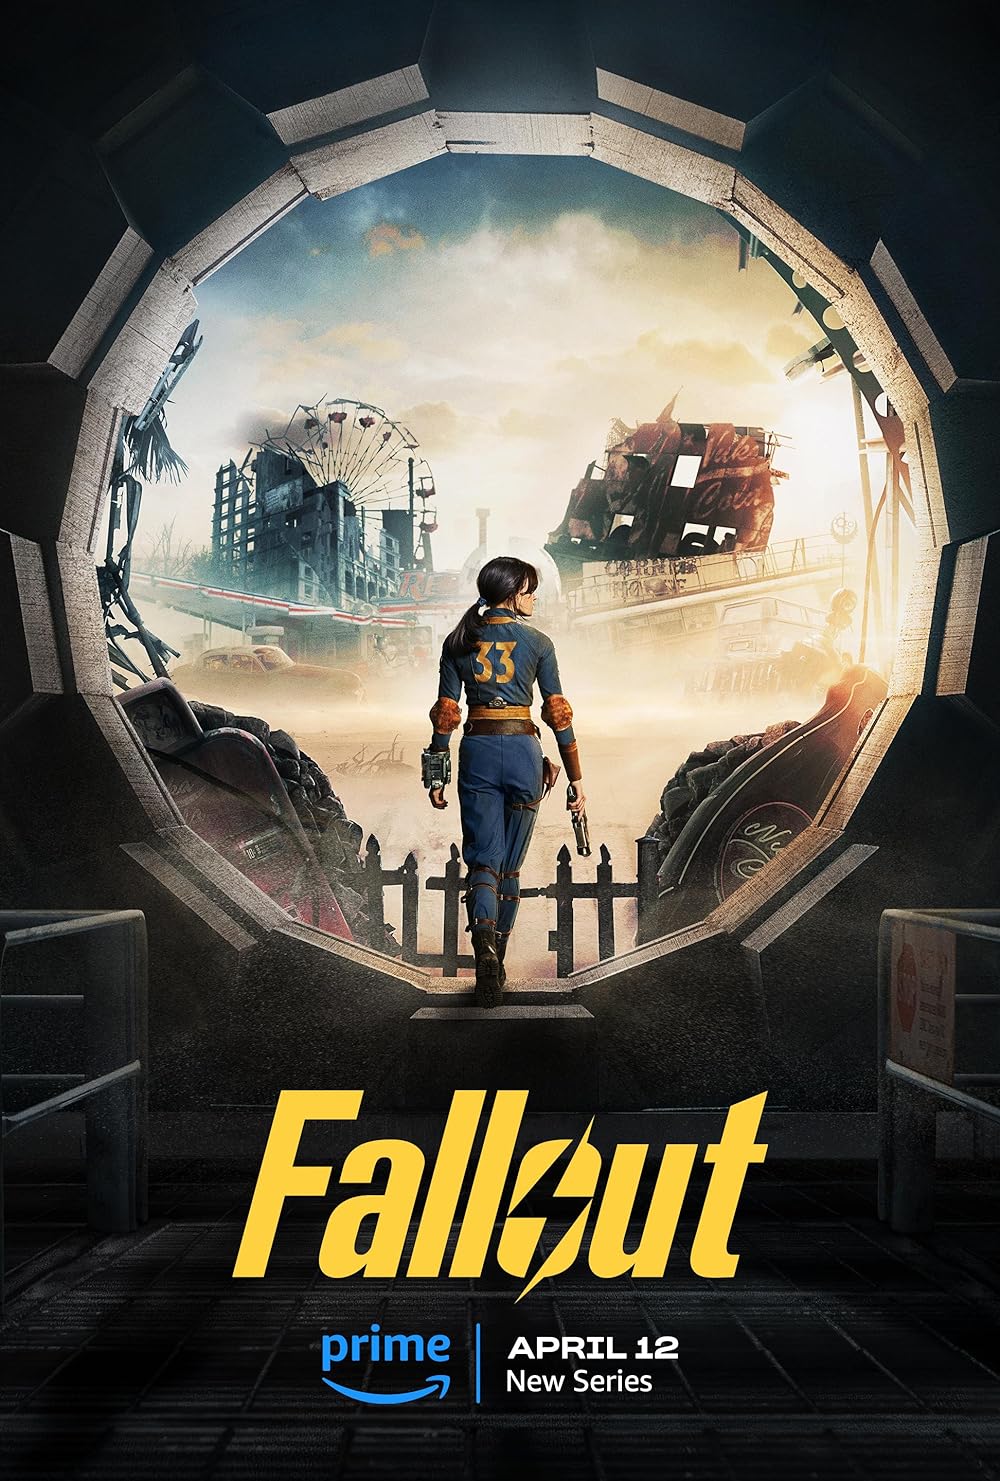 Promotional poster for a new series titled 'Fallout' coming to Prime on April 12. The central figure is a person wearing a blue jumpsuit with the number 33 on the back, adorned with orange shoulder pads. They are looking out towards a desolate, post-apocalyptic landscape through a large, broken circular vault door. Ruins of a ferris wheel and dilapidated buildings under a cloudy sky can be seen in the distance, alongside the faded neon signs. The bold, yellow 'Fallout' title is at the bottom with the Prime logo and release date.